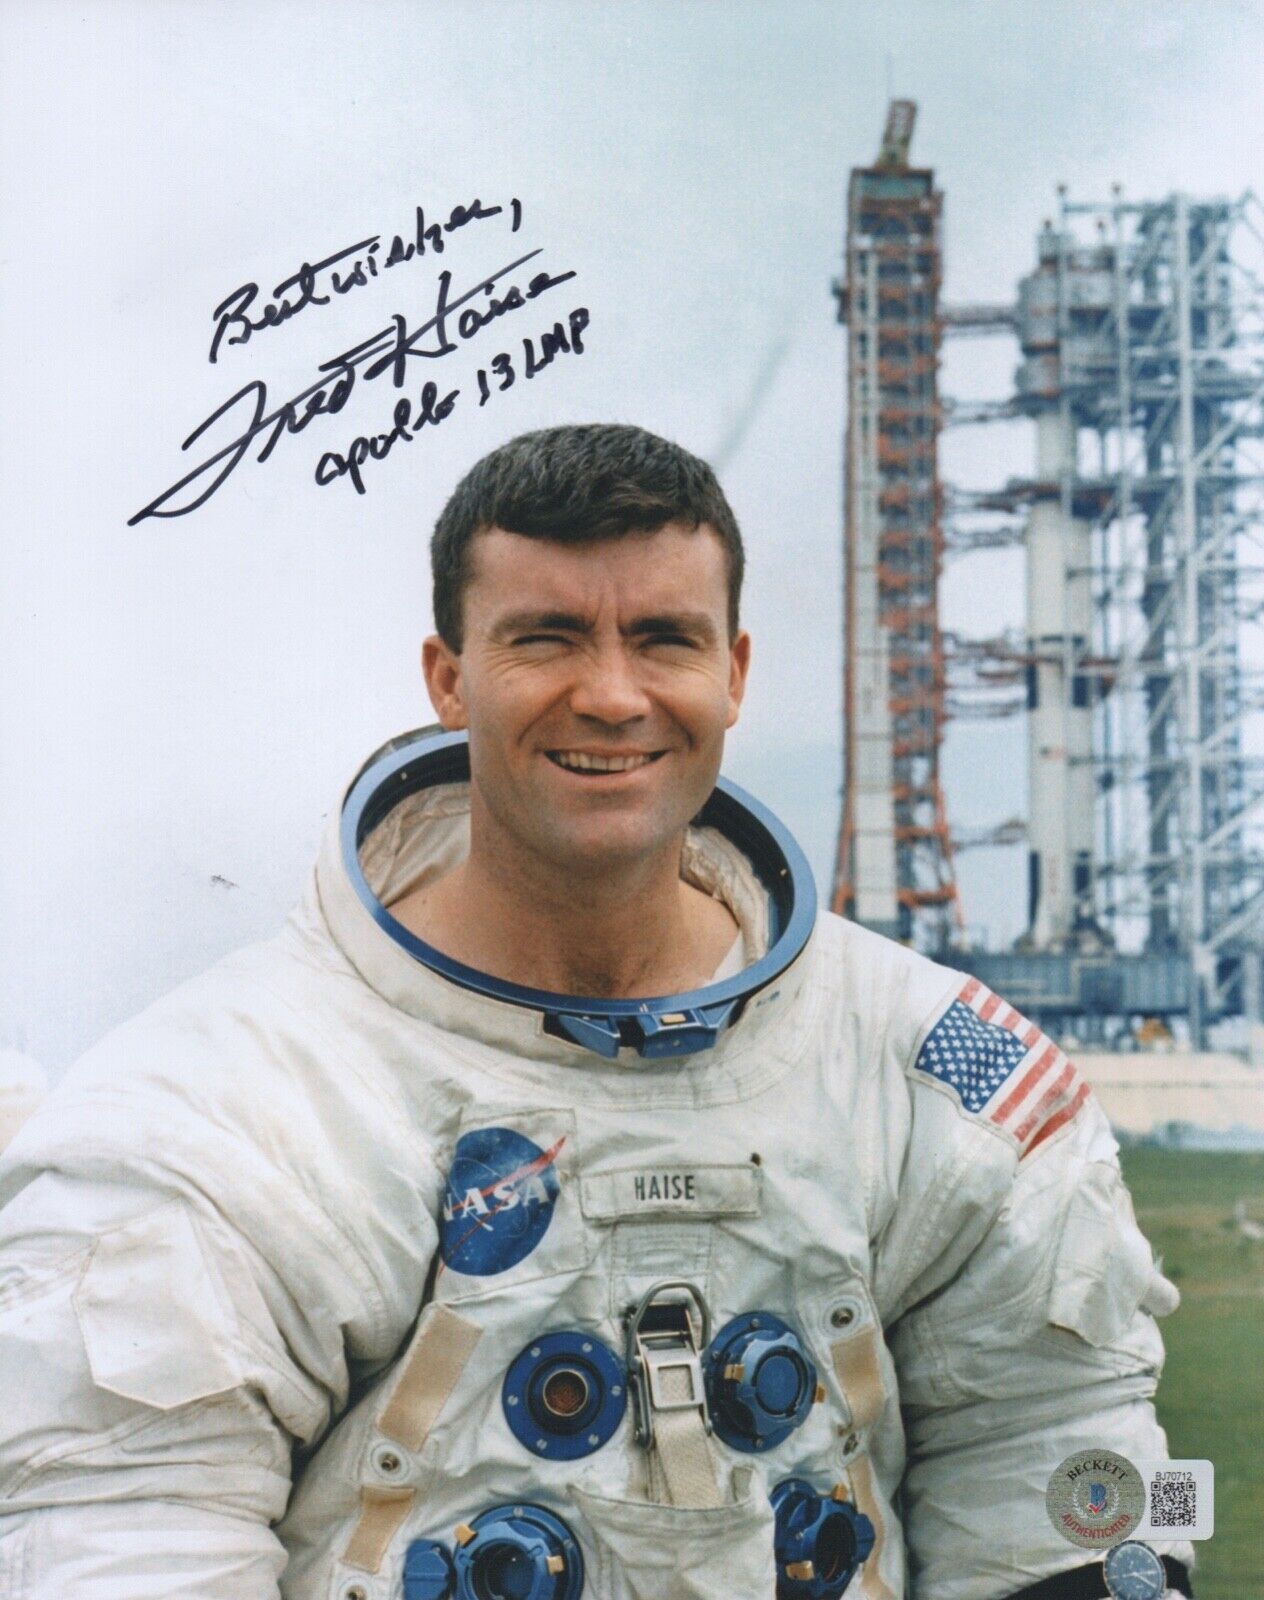 RARE Fred Haise JR Autographed Signed APOLLO 13 Astronaut 8x10 Photo Beckett BAS